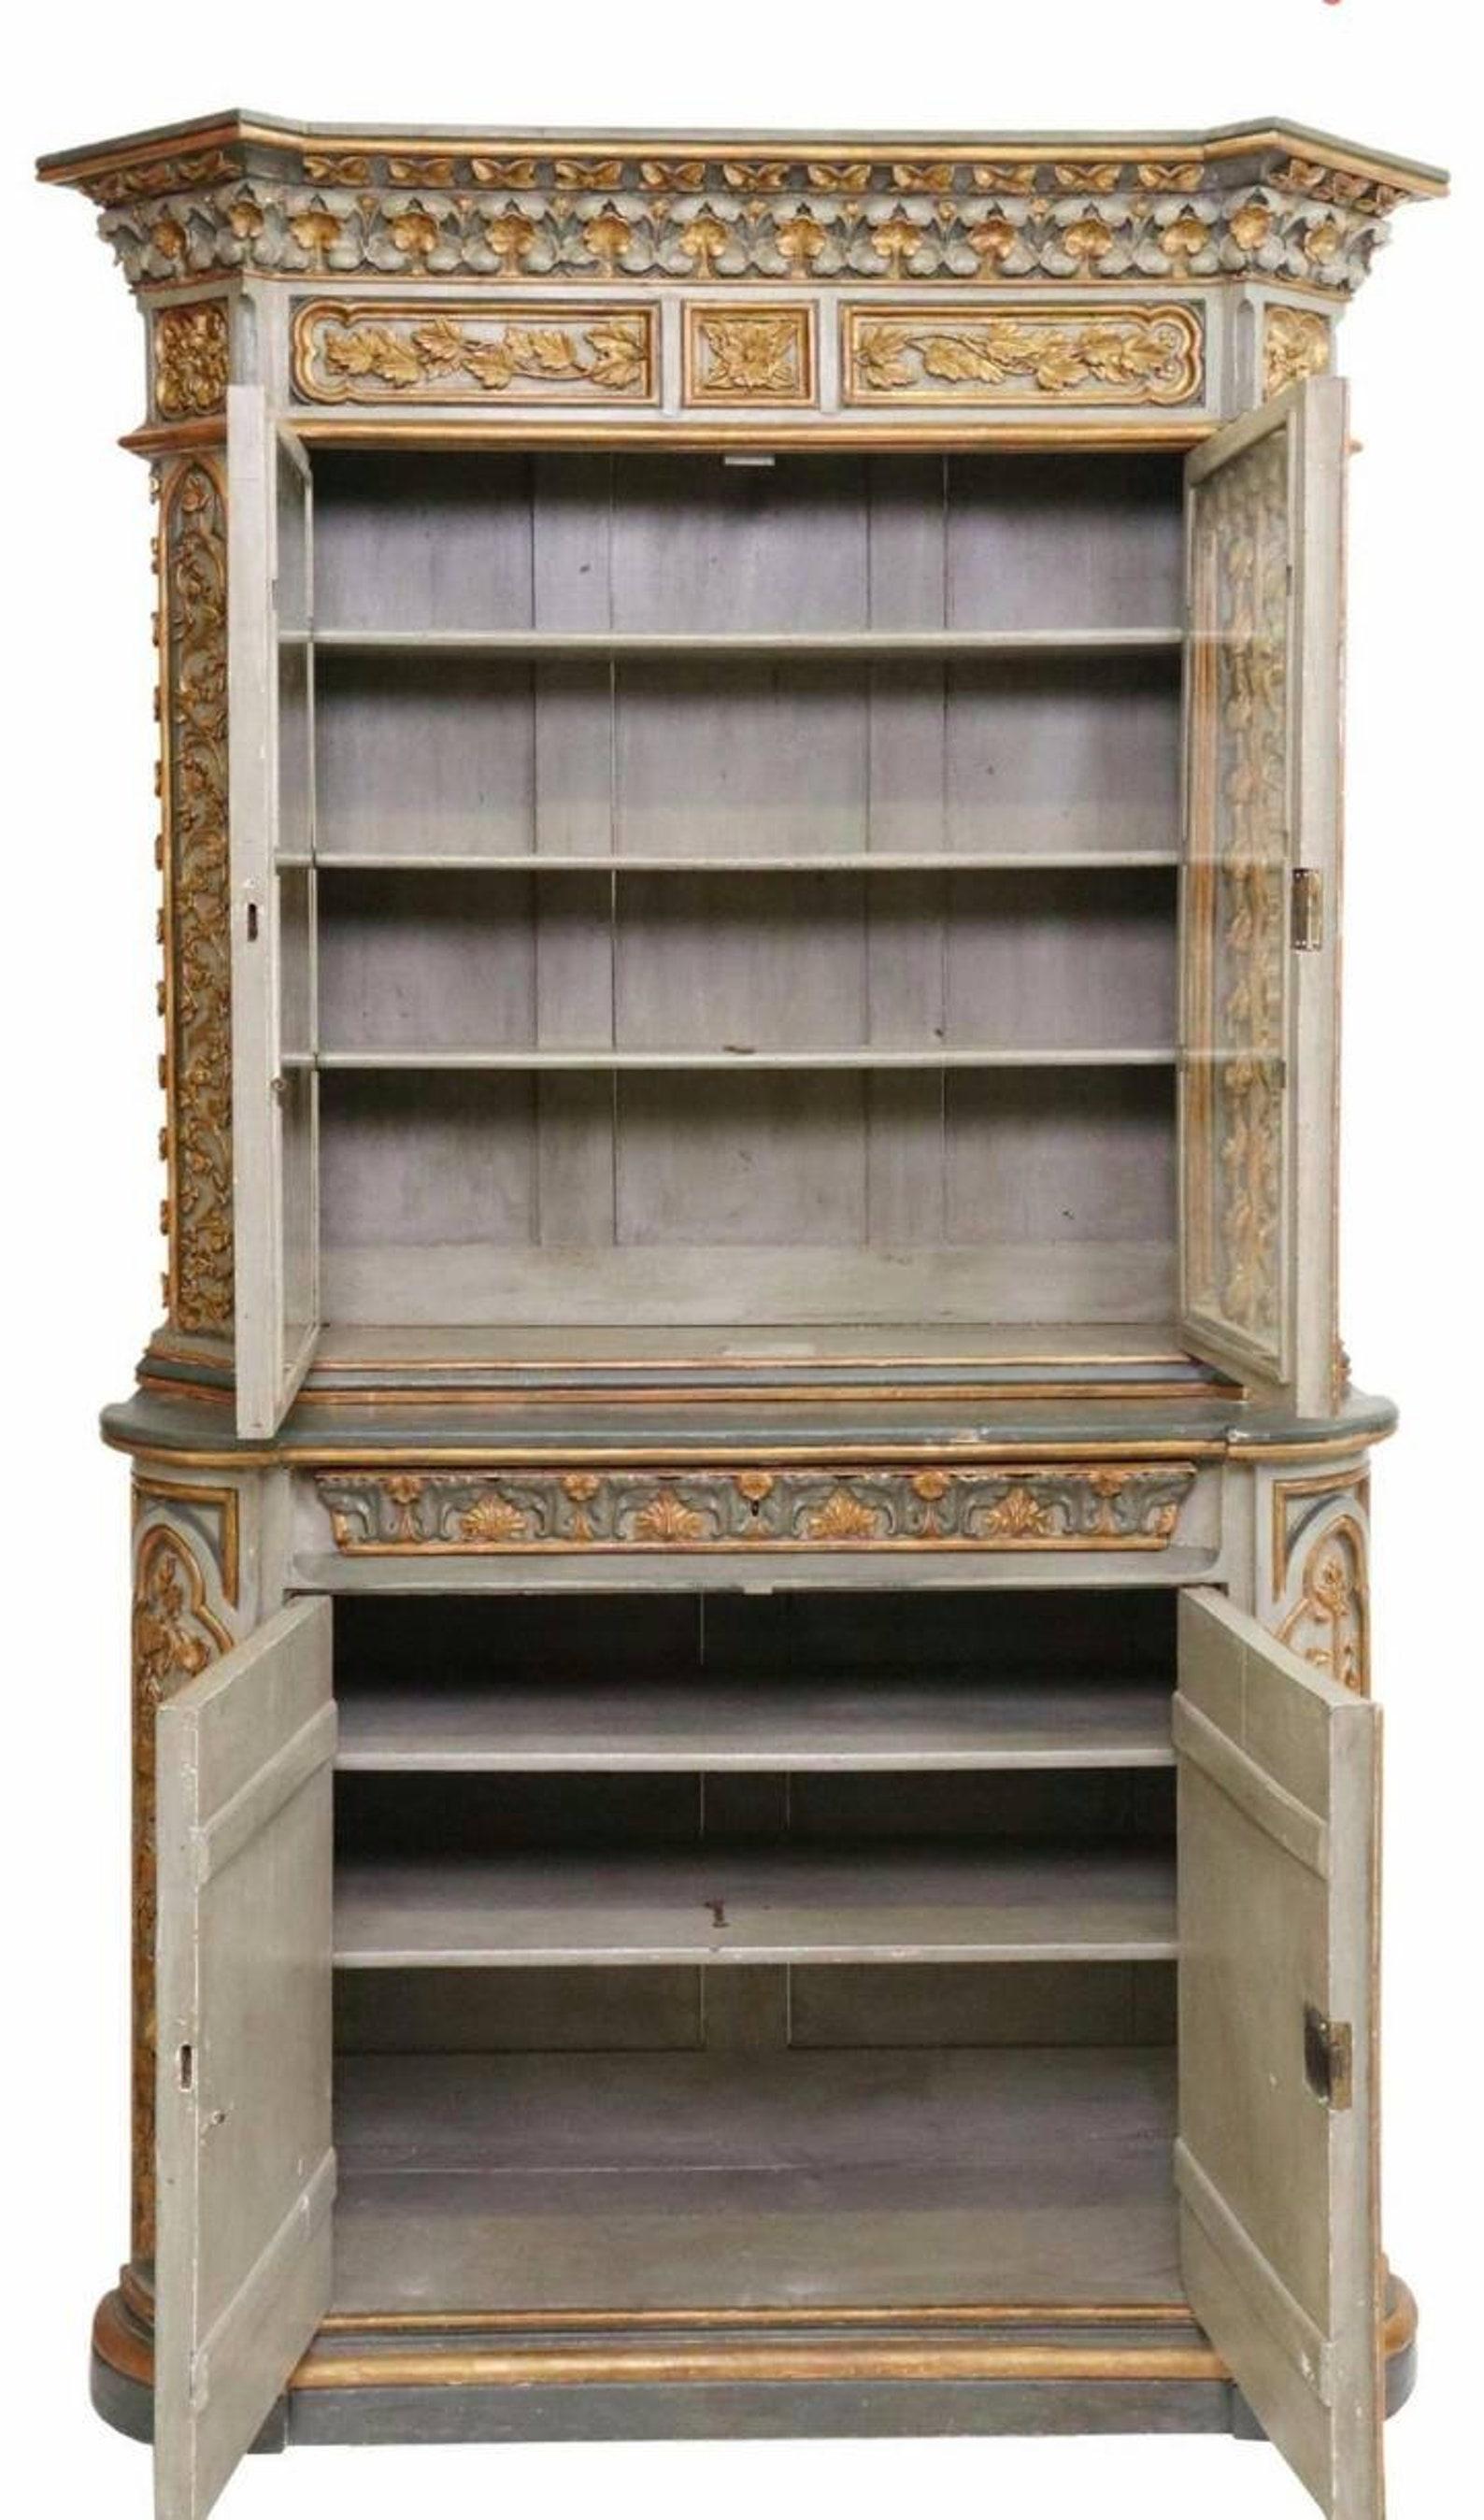 19th Century French Gothic Revival Carved Bibliothèque Bookcase In Good Condition For Sale In Forney, TX